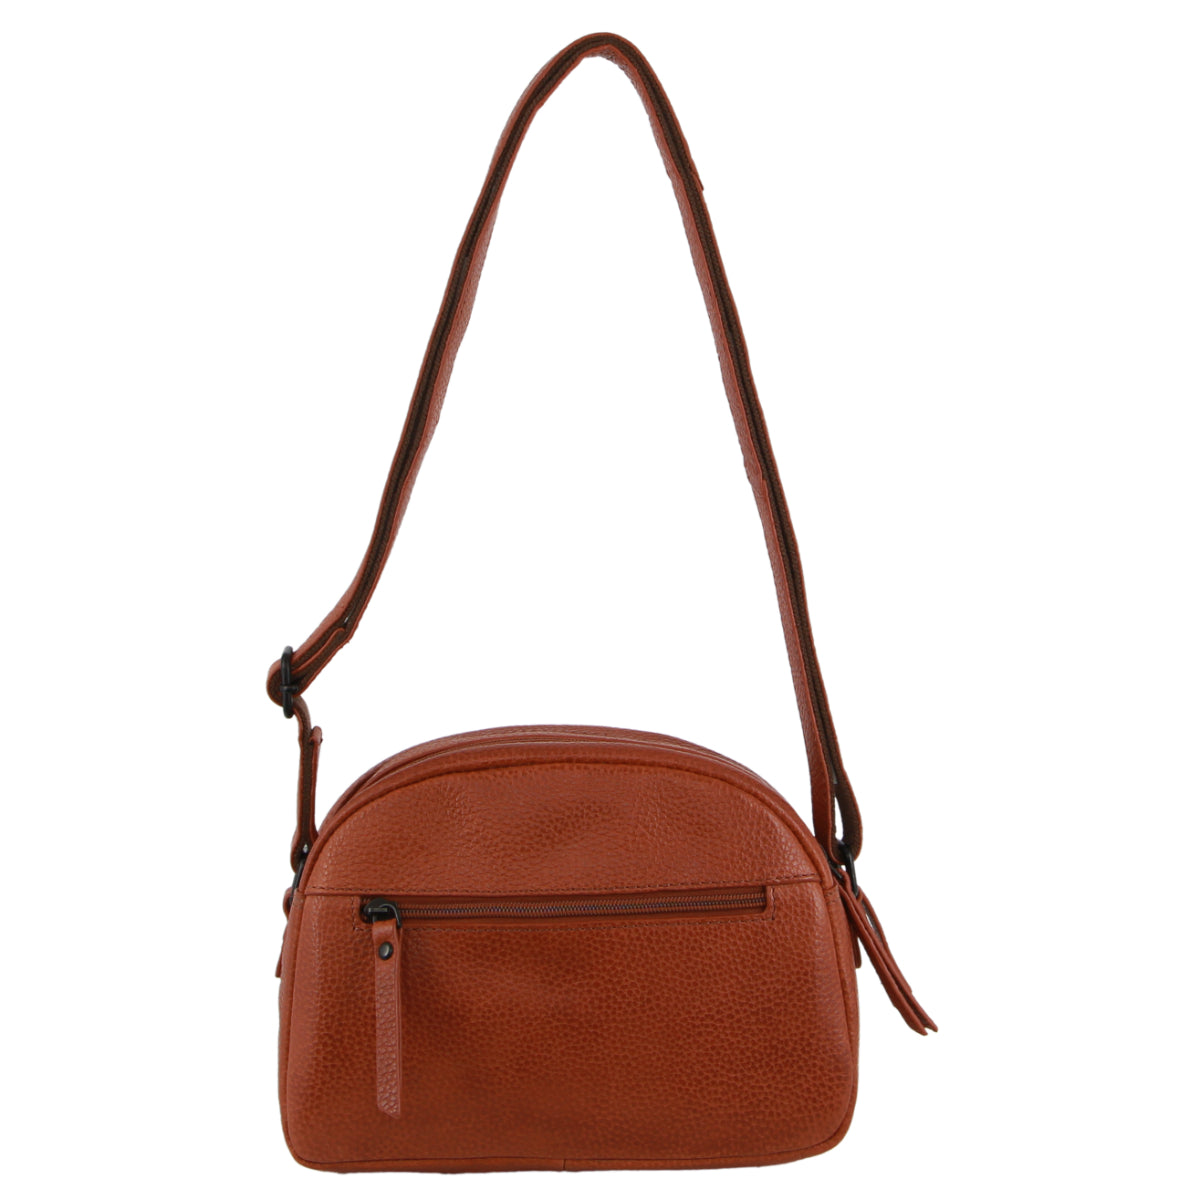 Milleni - NL3869 Small rounded leather sidebag - Cognac